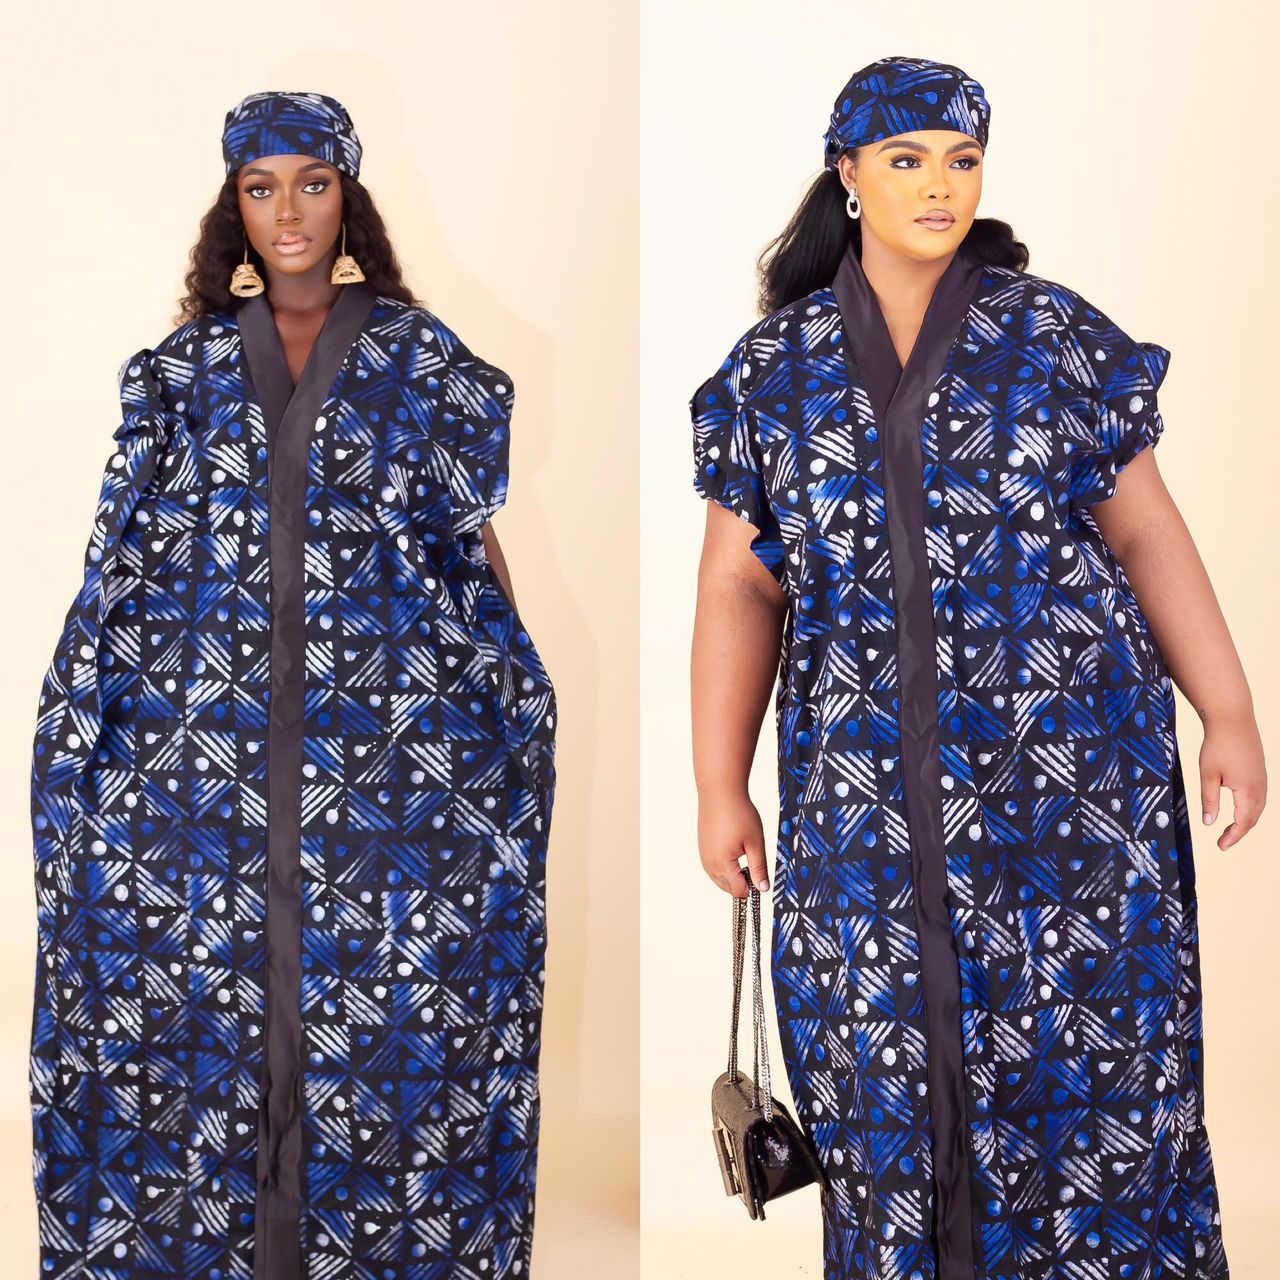 Retailer & Wholesaler of African Print Fabrics, Outfits & Accessories